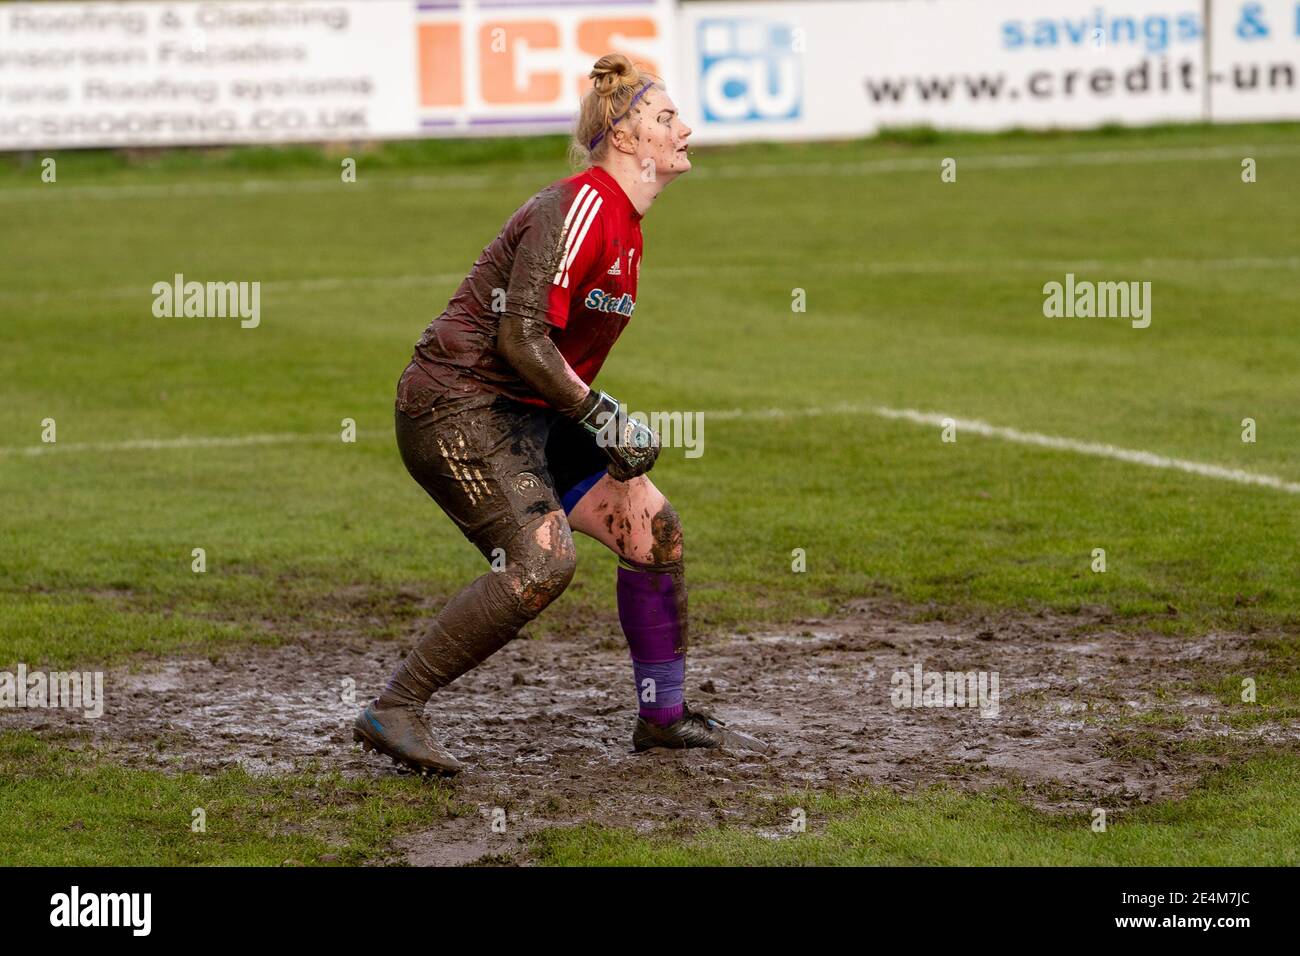 Lewes, UK. 24th Jan, 2021. Muddy work for the keepers ahead of the FA Women's Championship match between Lewes and Sheffield United at The Dripping Pan in Lewes. Credit: SPP Sport Press Photo. /Alamy Live News Stock Photo